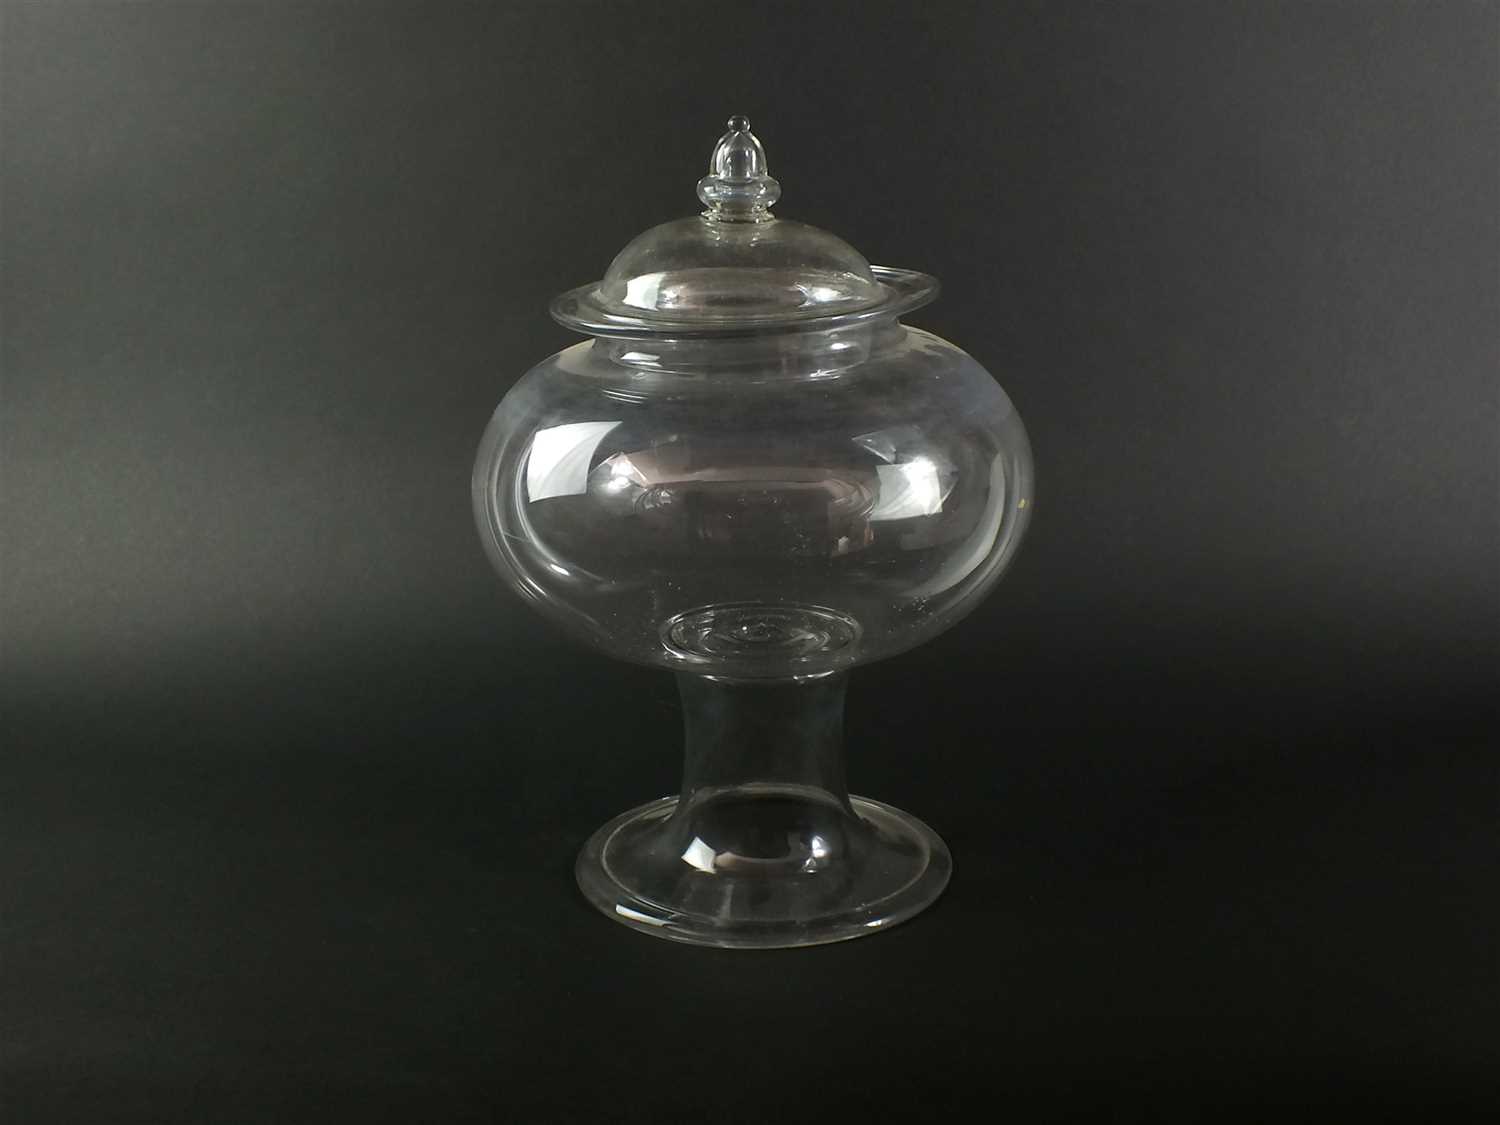 An early 19th century glass leech jar and cover